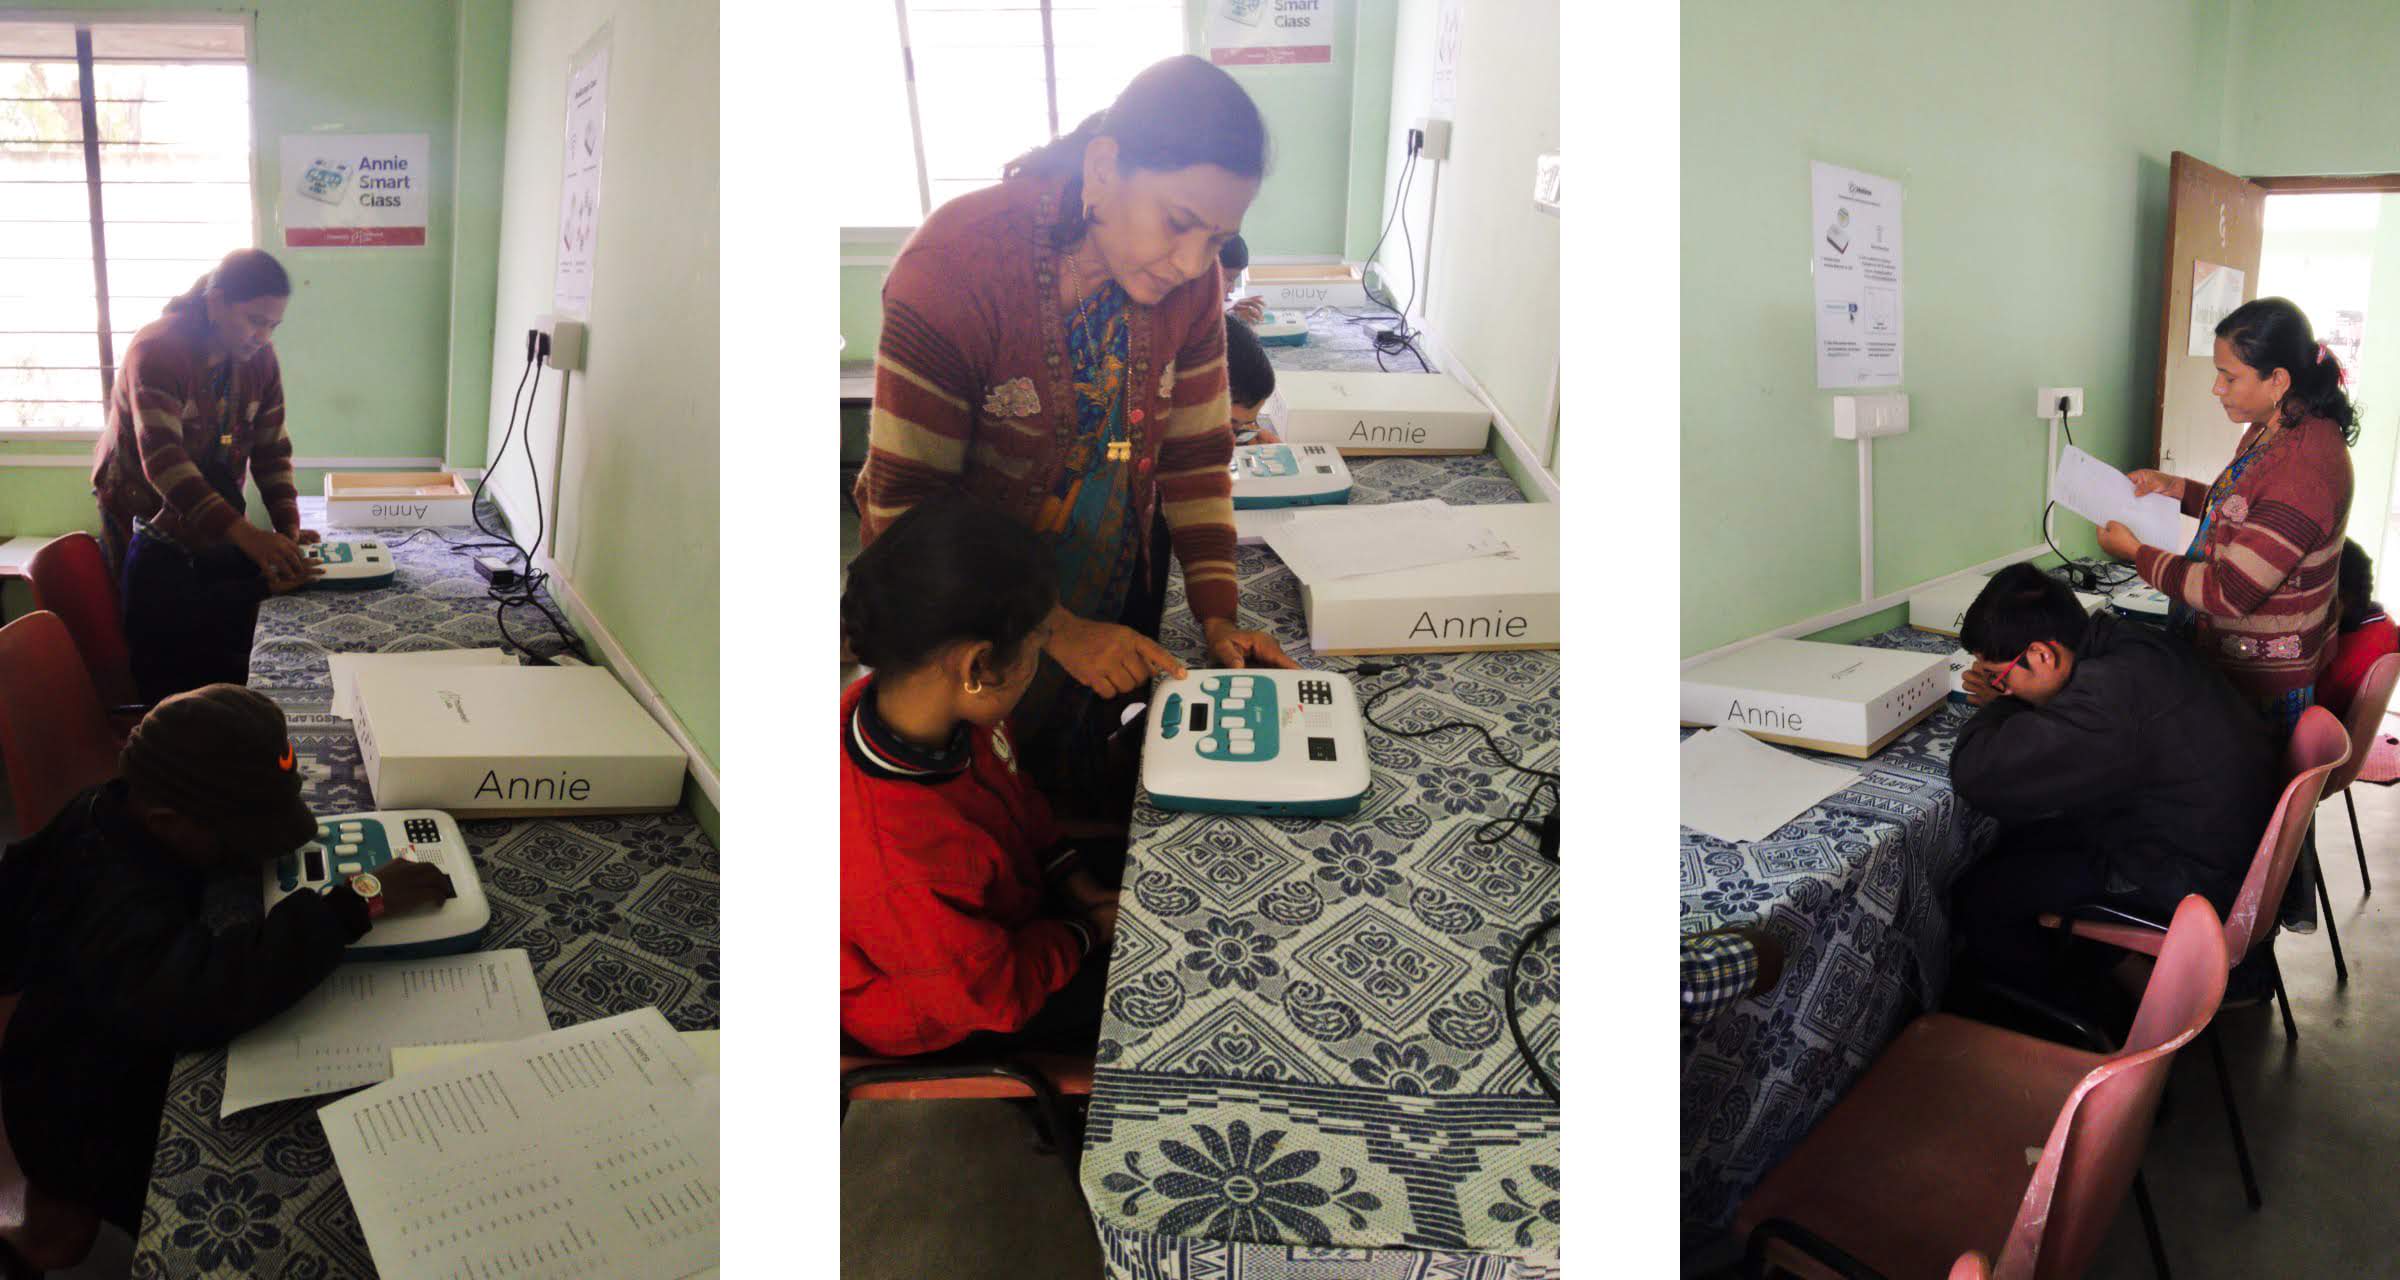 In three images, a teacher assists her students in using their Annie and checks their proficiency with Braille